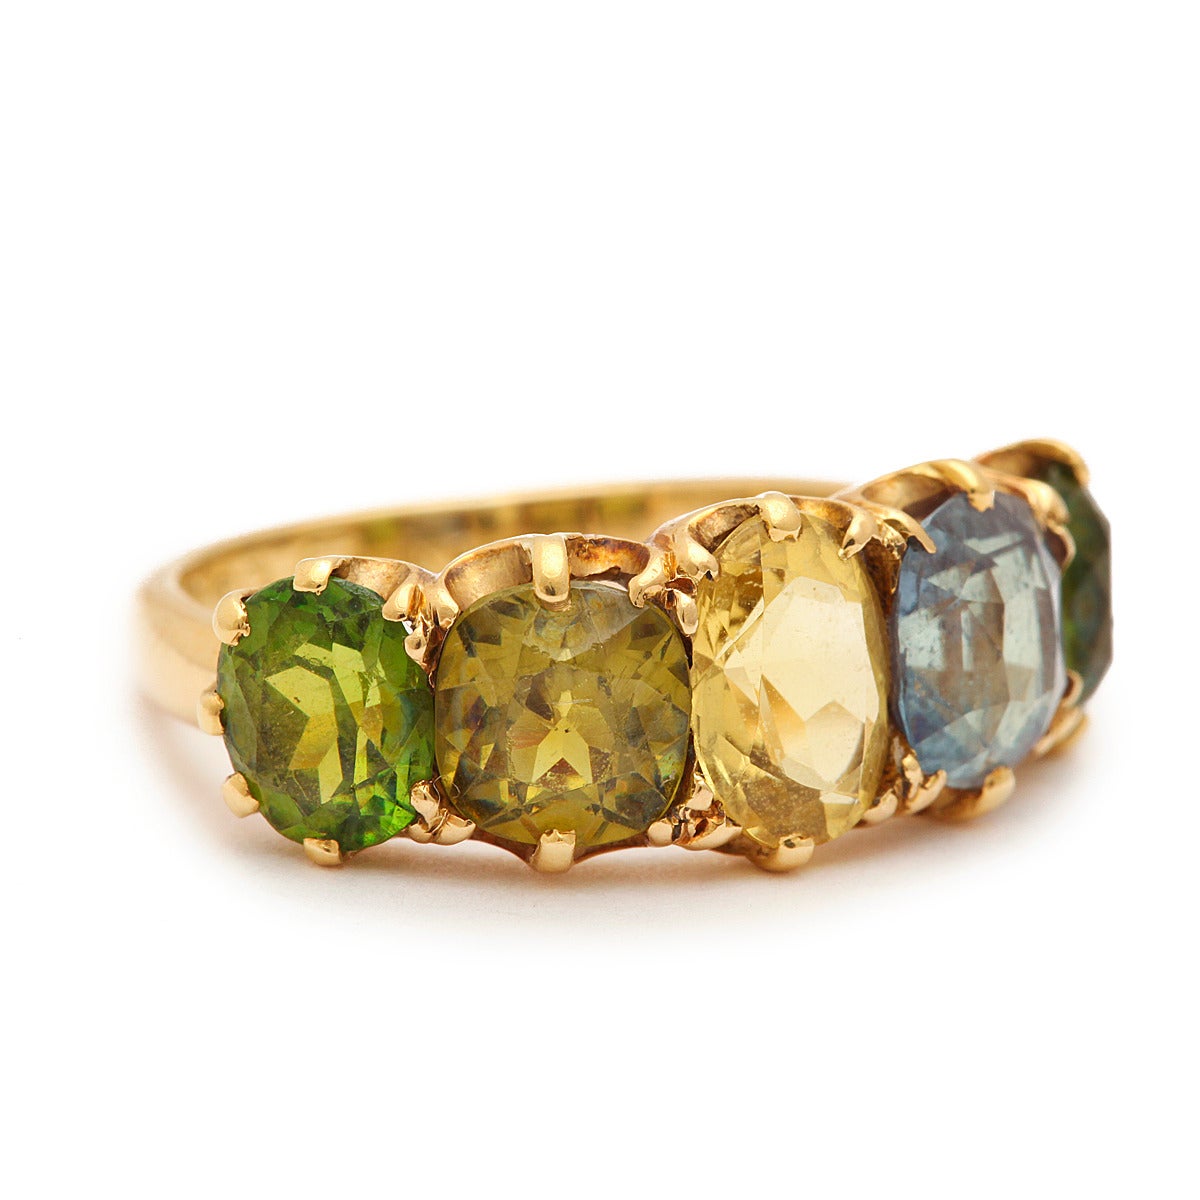 Victorian half-hoop five-stone ring set in a gradation of autumnal hues with two demantoid garnets, one green sapphire, one yellow sapphire, and one alexandrite, set in a 15k yellow gold mount.

By W.G., London, 1888